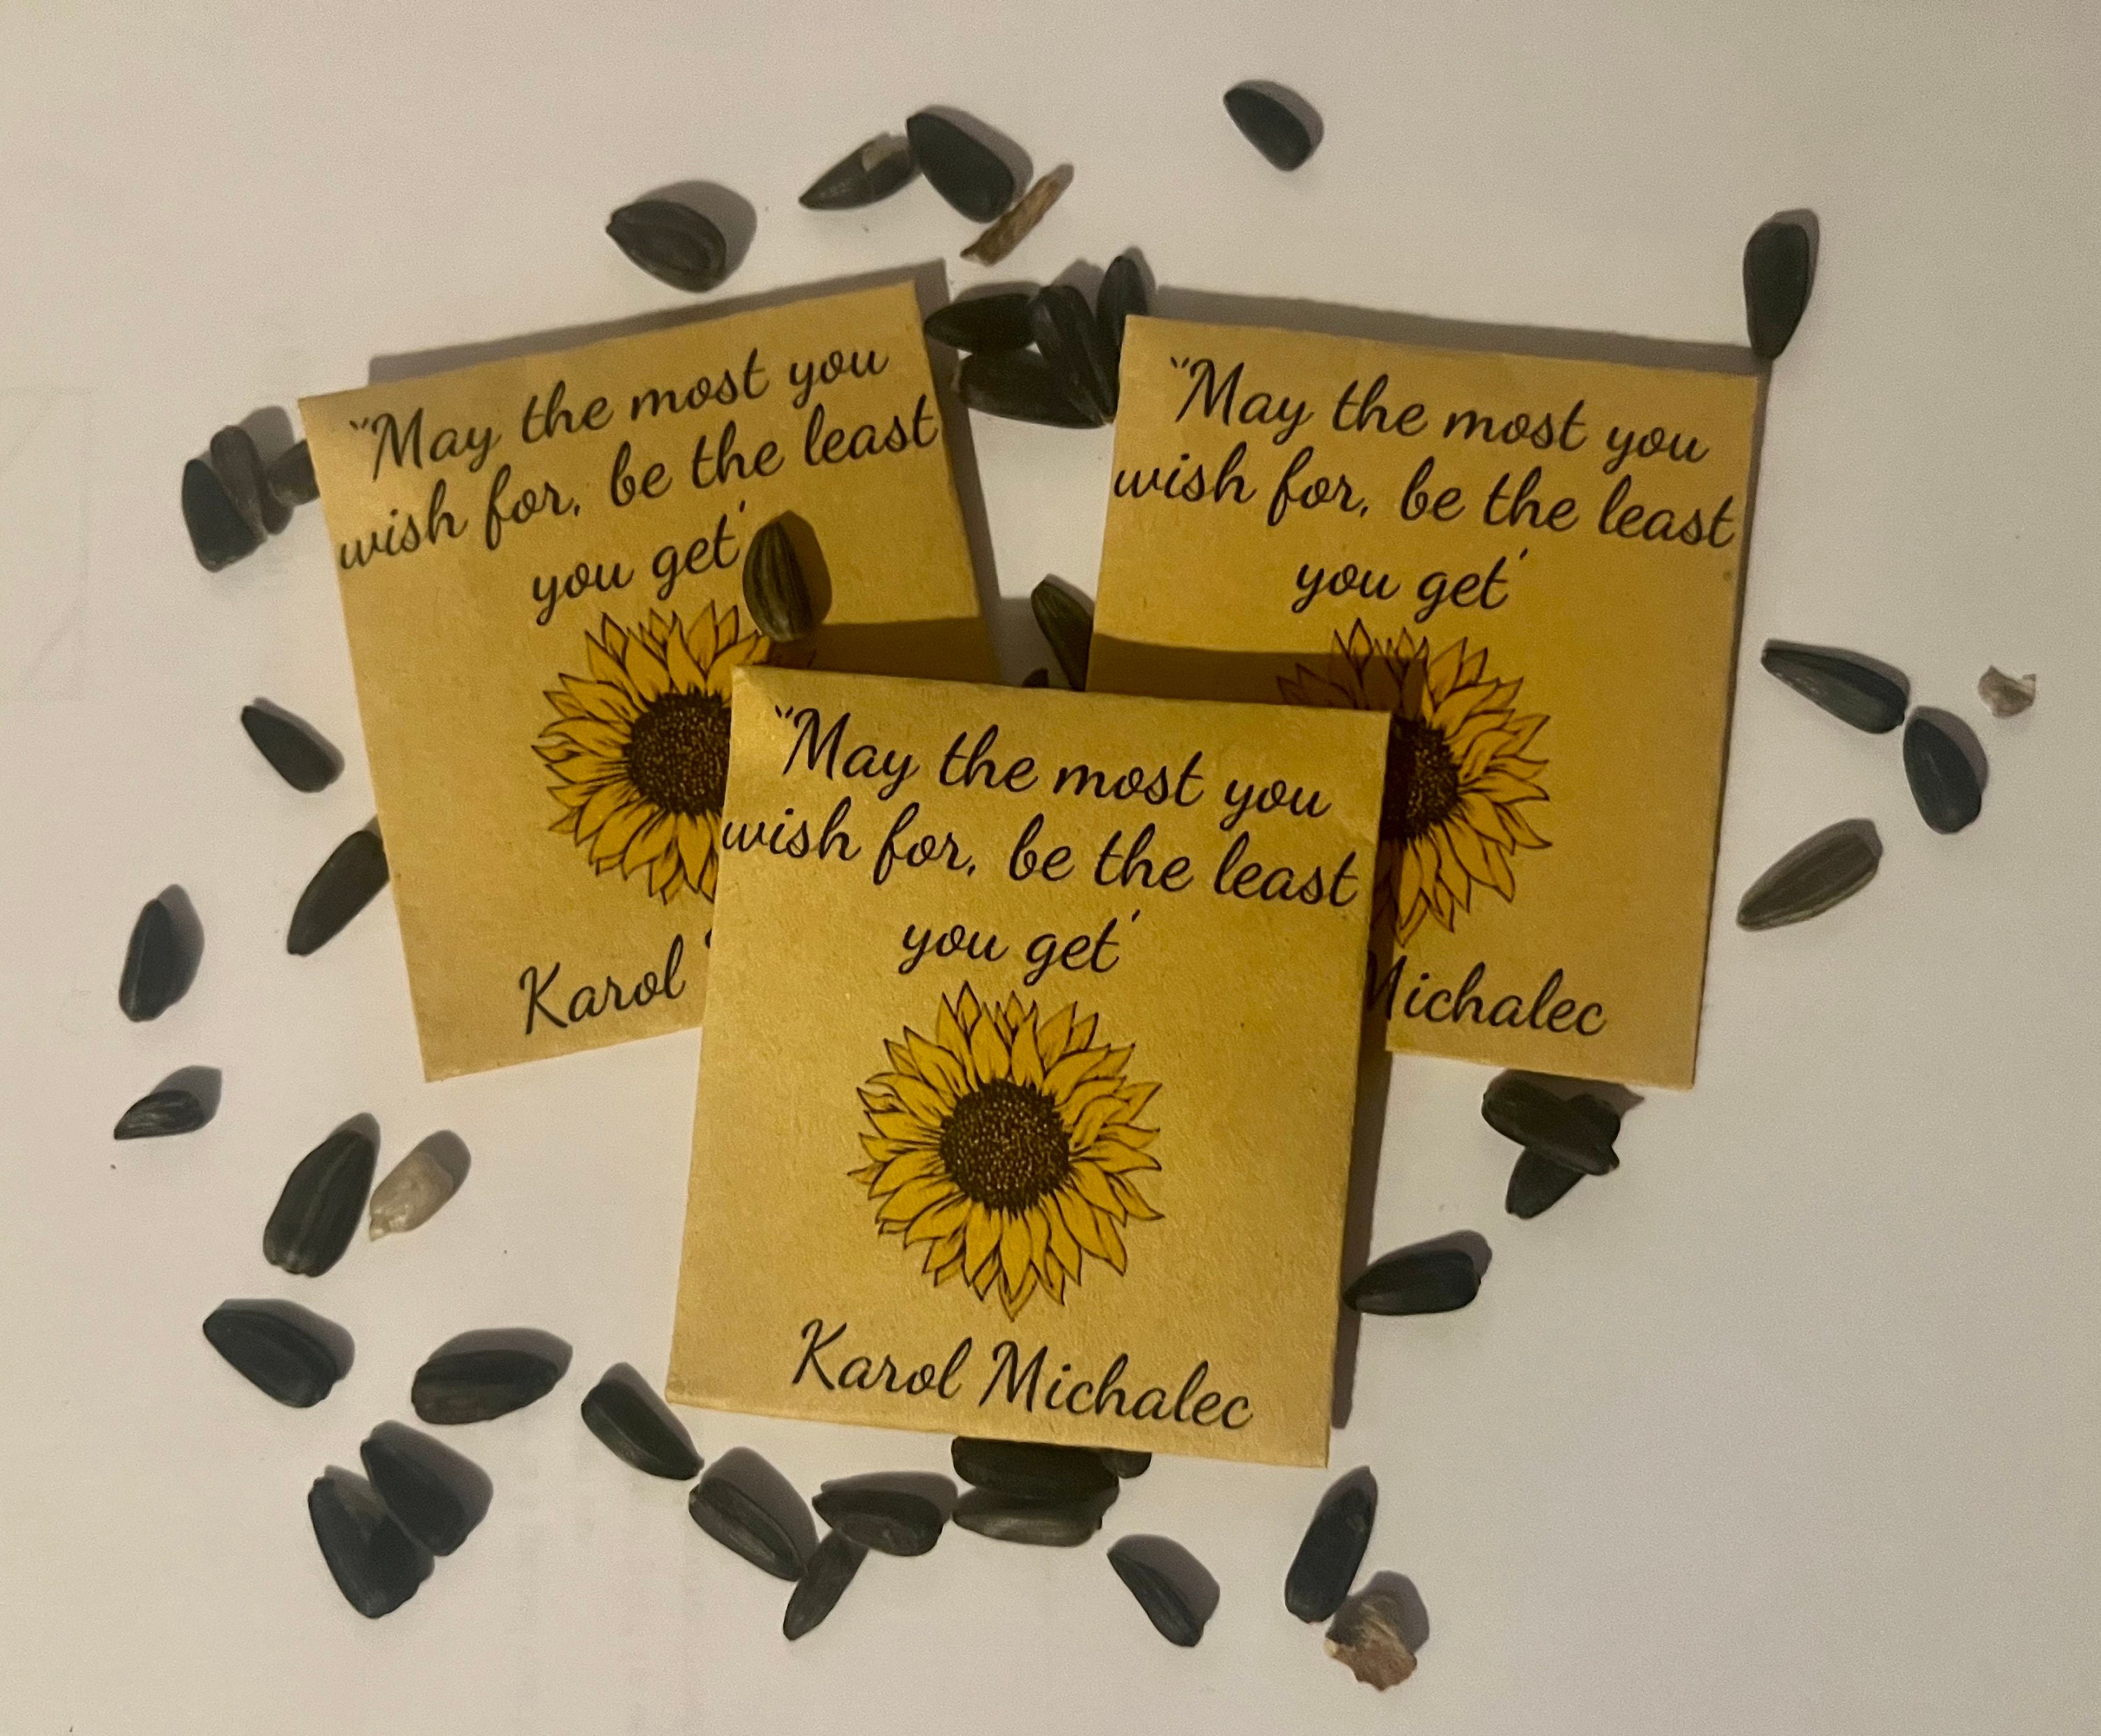 Personalised Funeral Sunflower Seed Packets Envelopes Memorial Remembrance  Favours Keepsake 